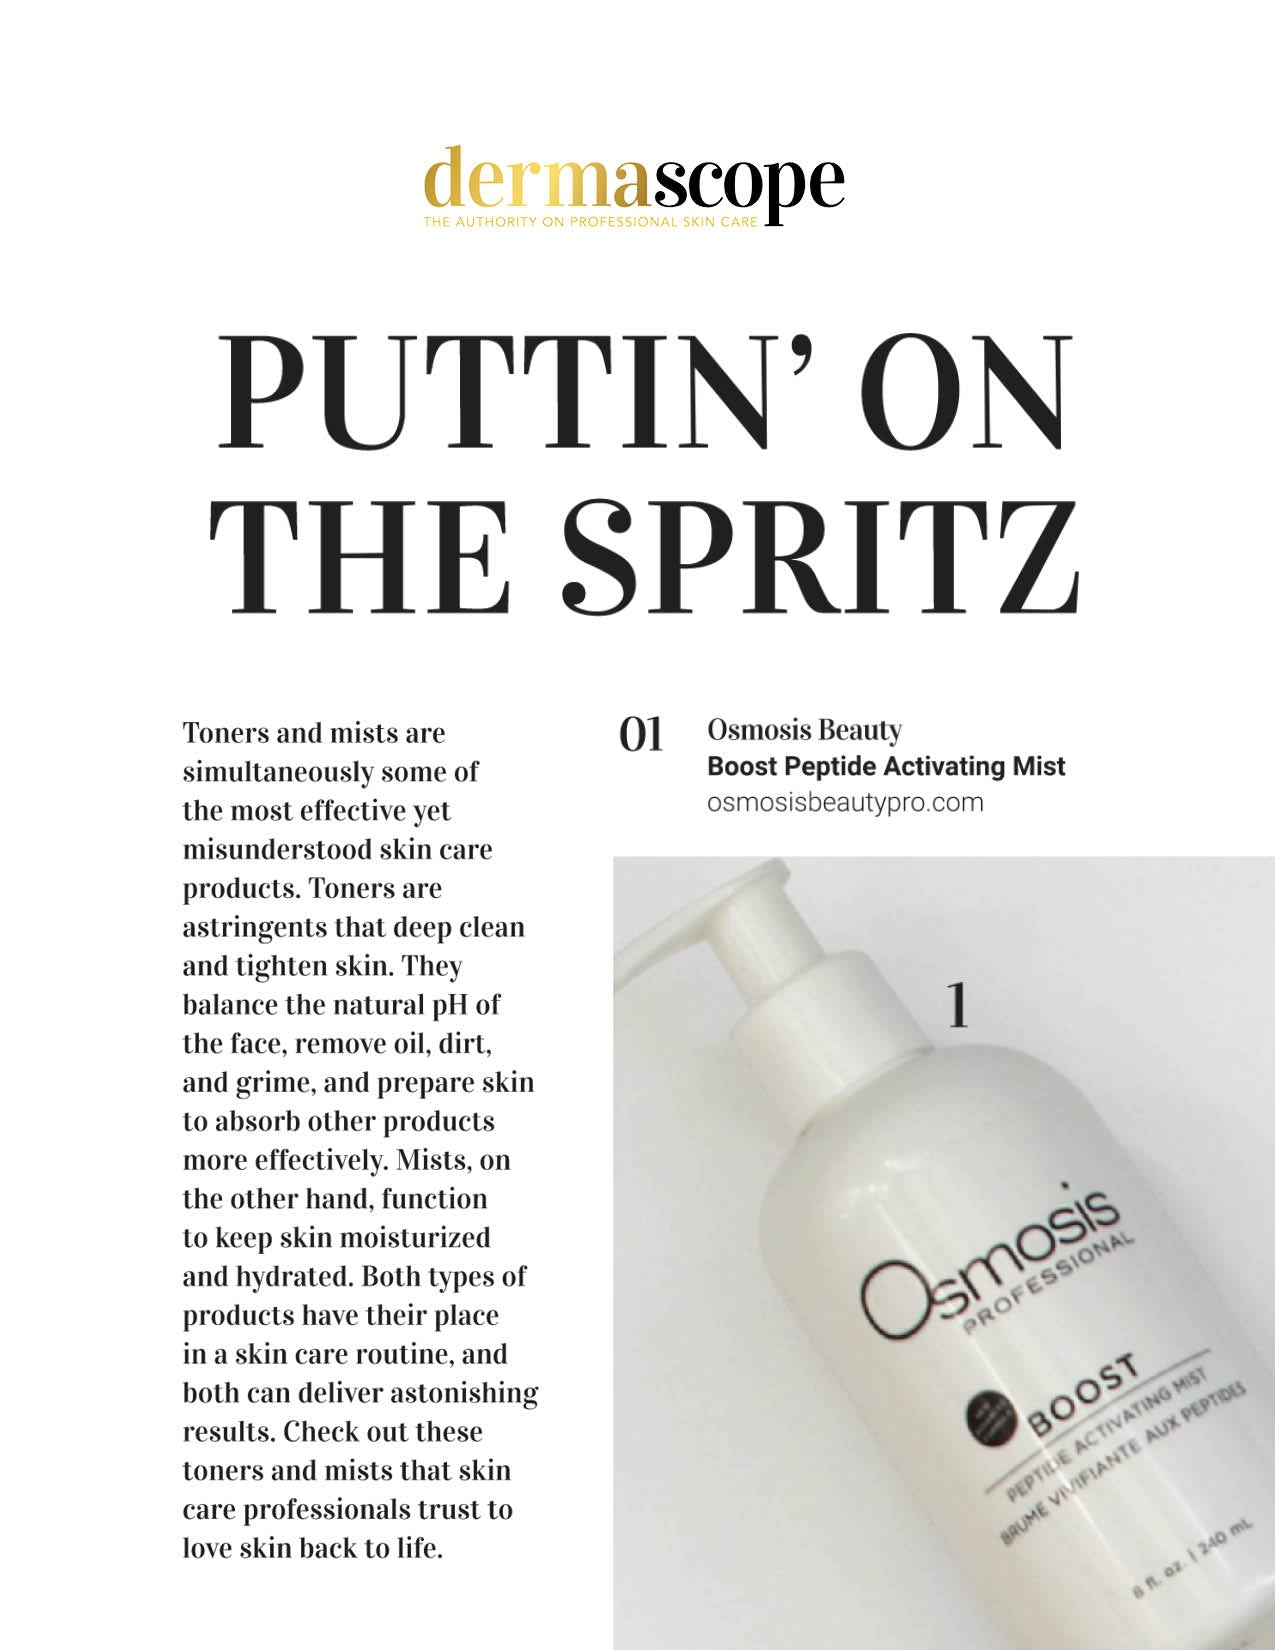 Boost Peptide Activating Mist was featured in the March 2023 issue of Dermascope